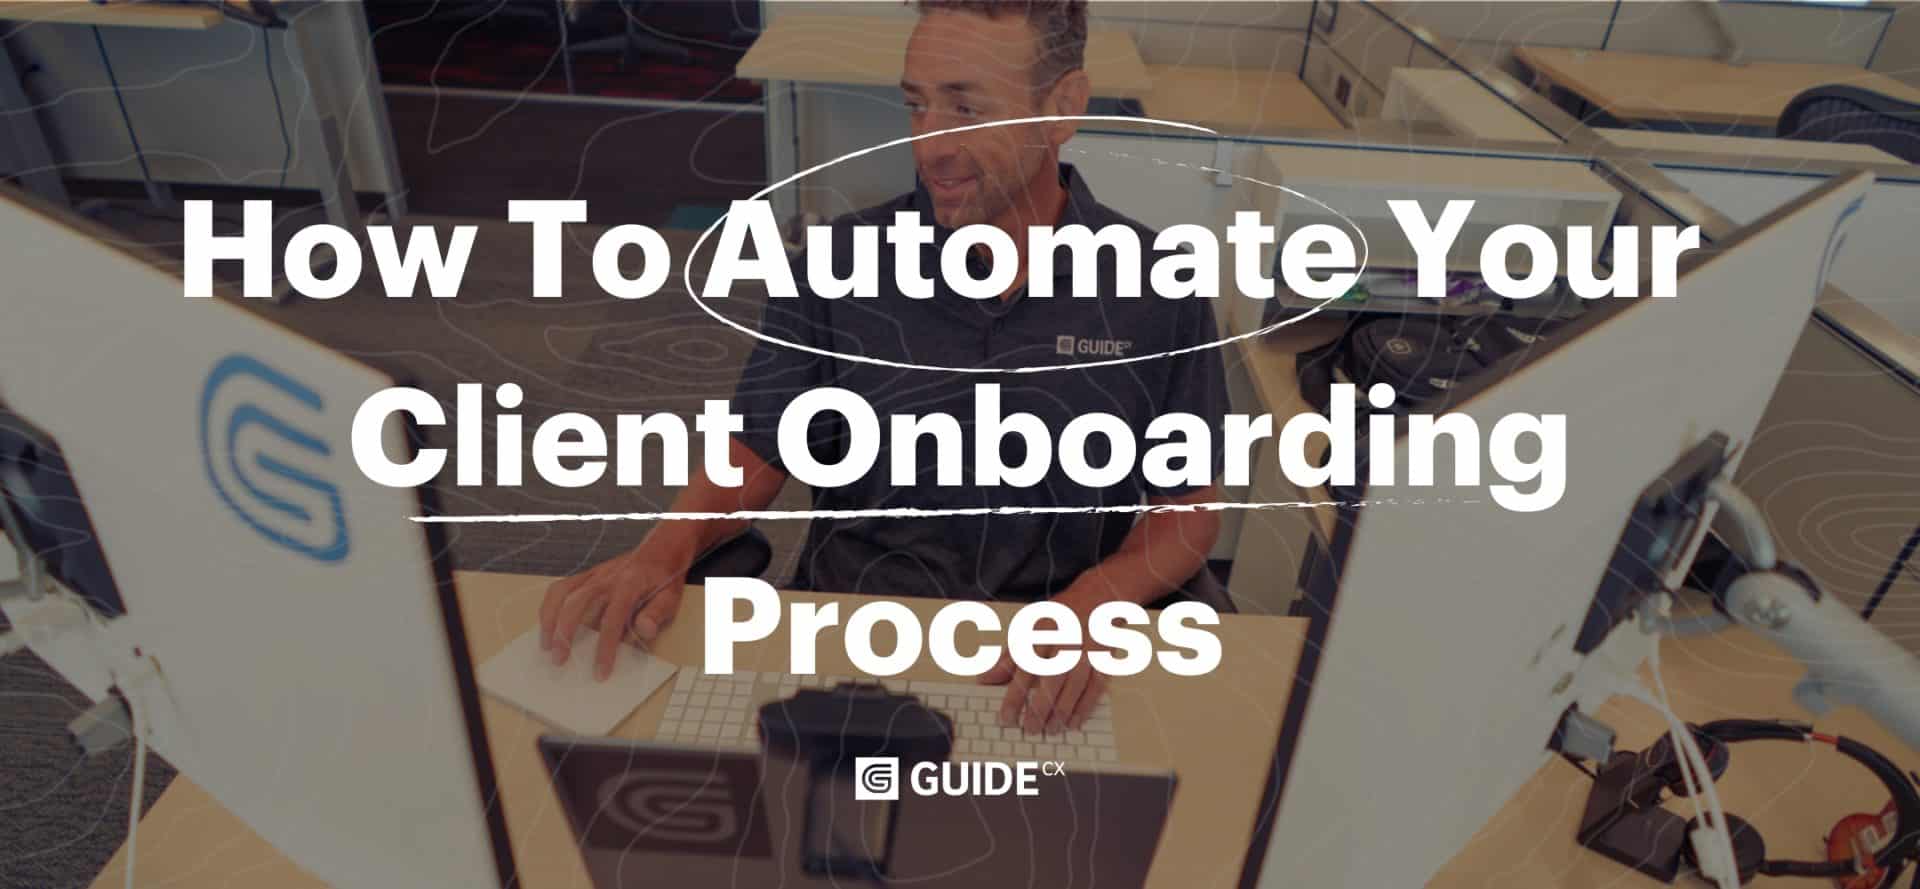 How to Automate Your Client Onboarding Process to boost customer experience